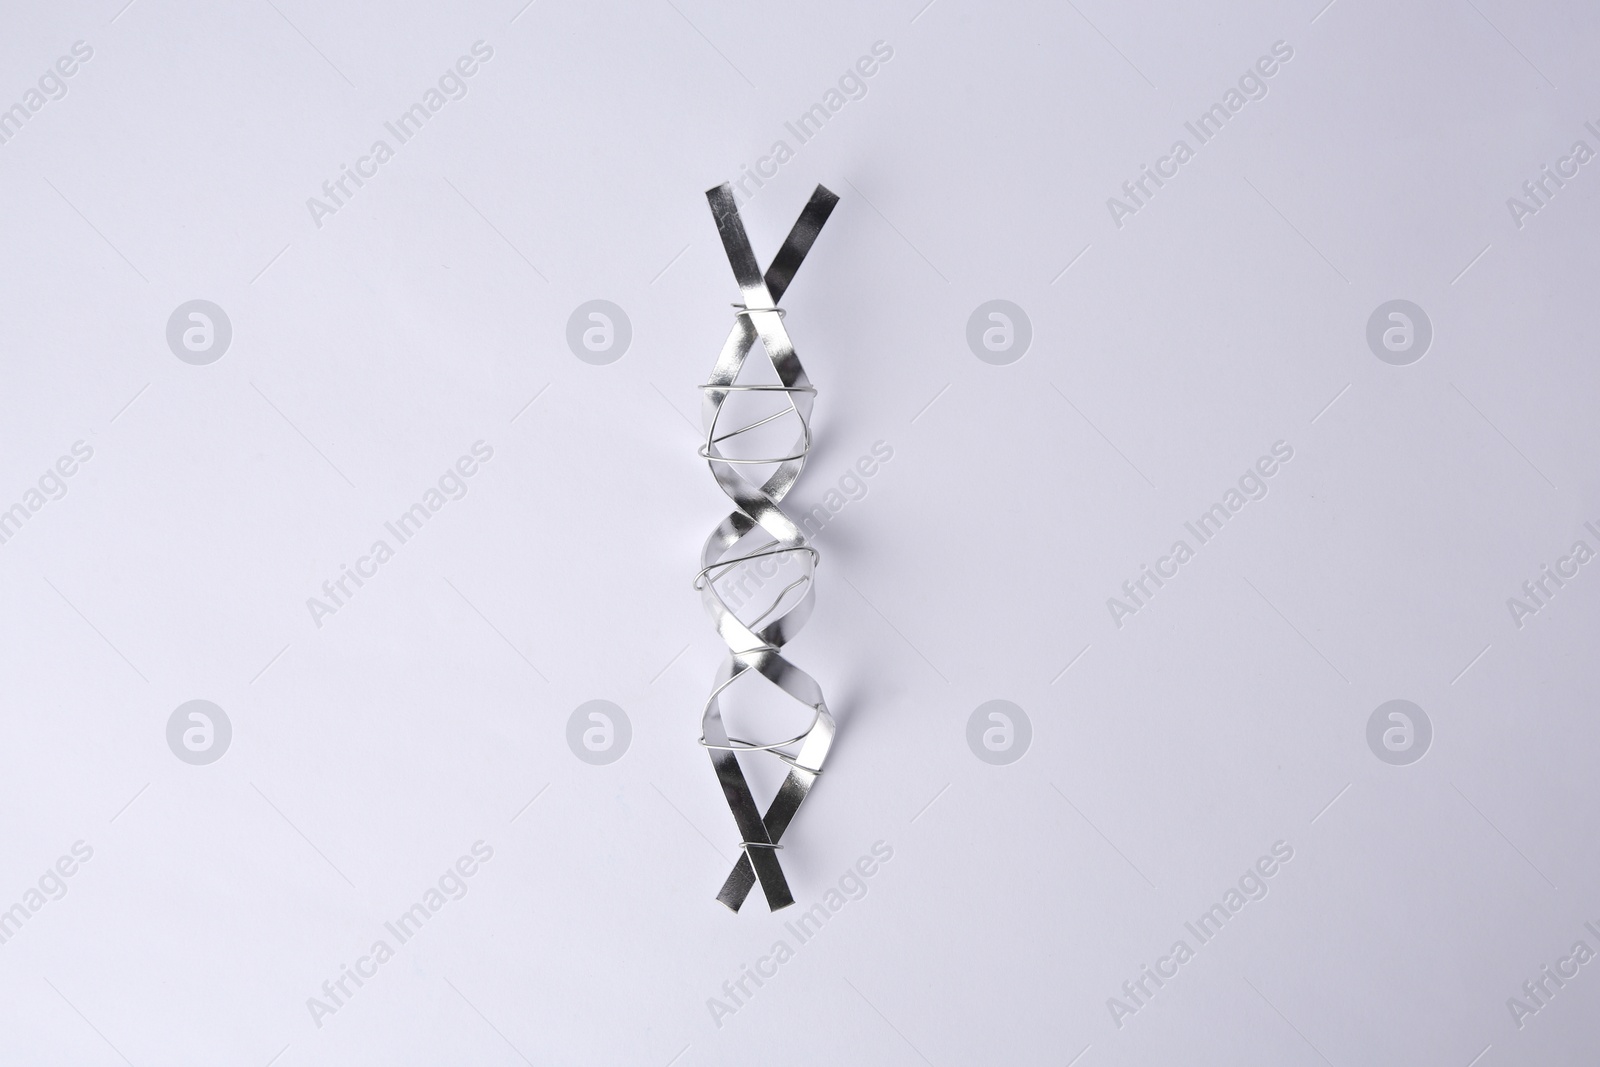 Photo of DNA molecular chain made of metal on white background, top view